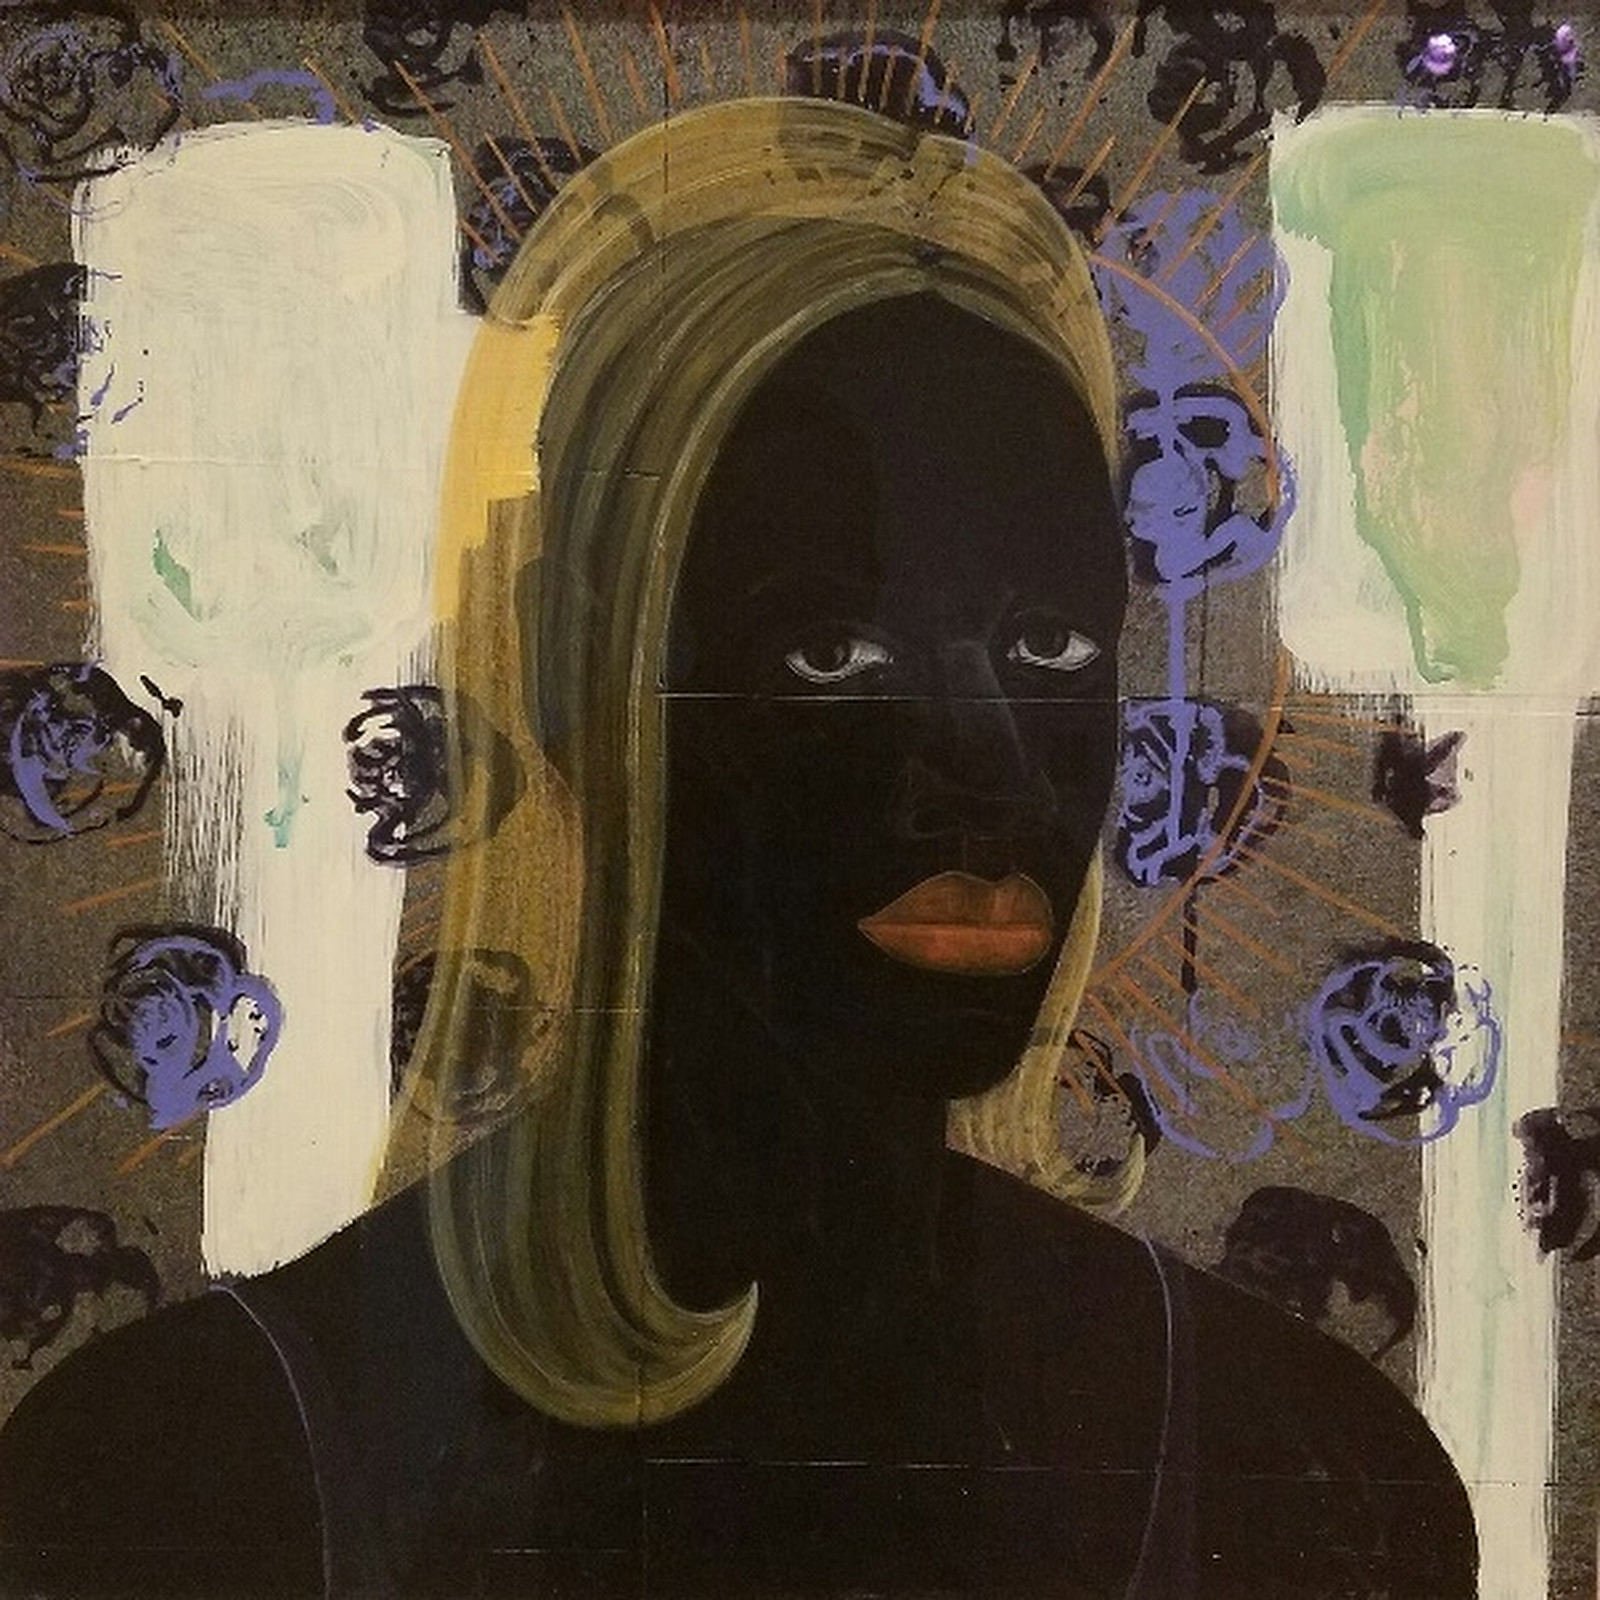 Kerry James Marshall, "Self-Portrait of the Artist as a Super Model," 1994, acrylic and collage on board